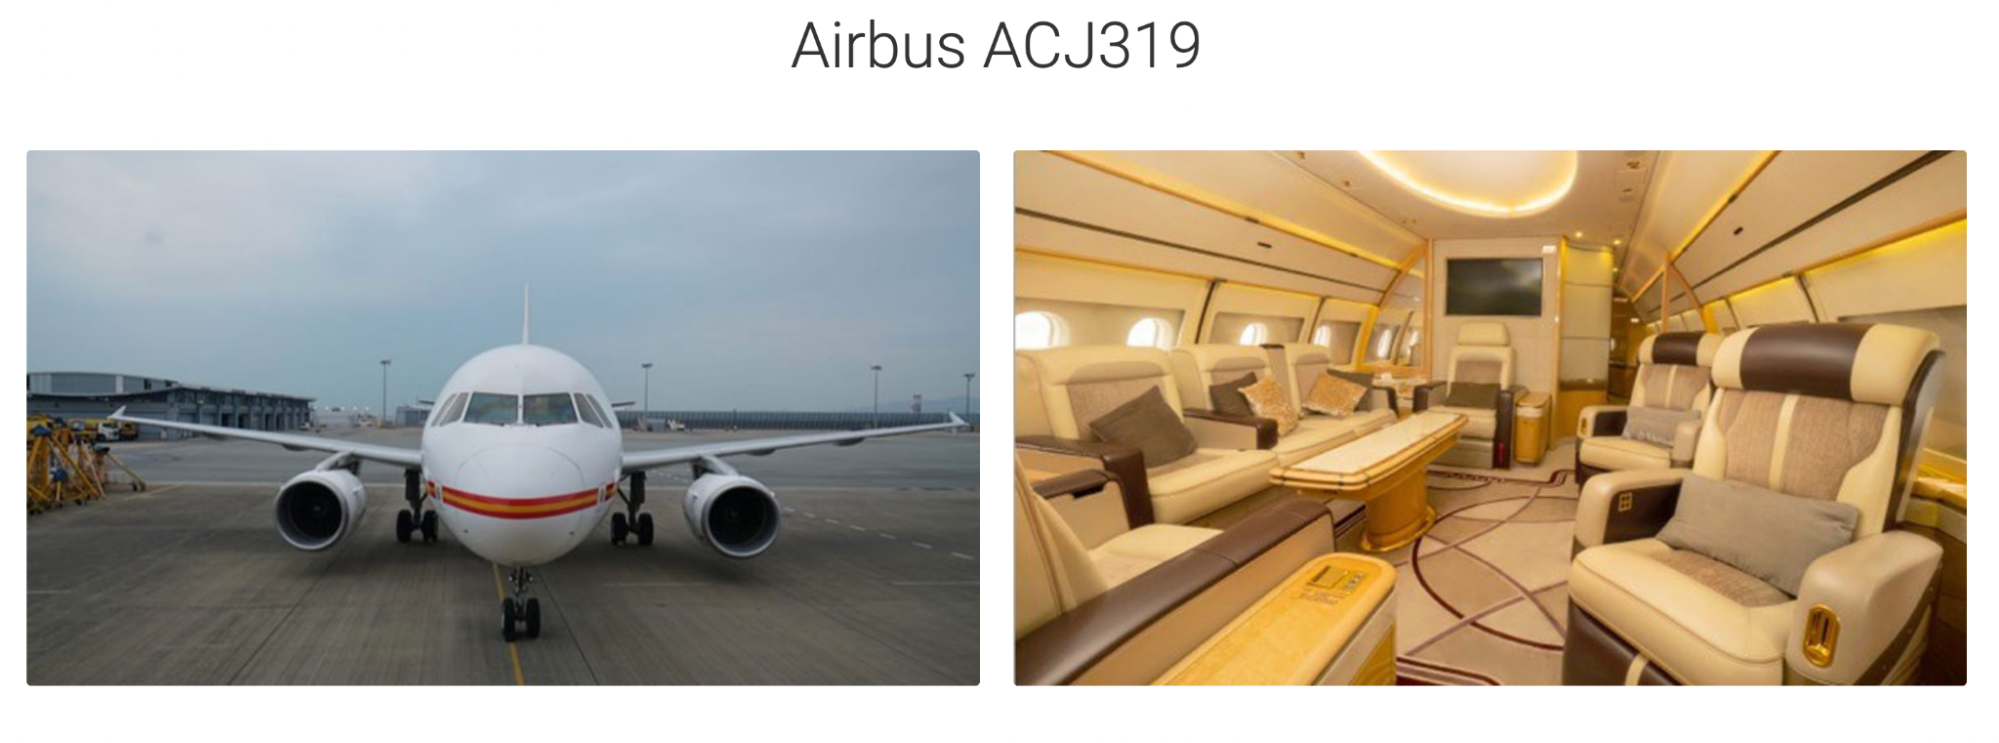 An image showing the exterior and interior of the VIP airliner Airbus ACJ319.